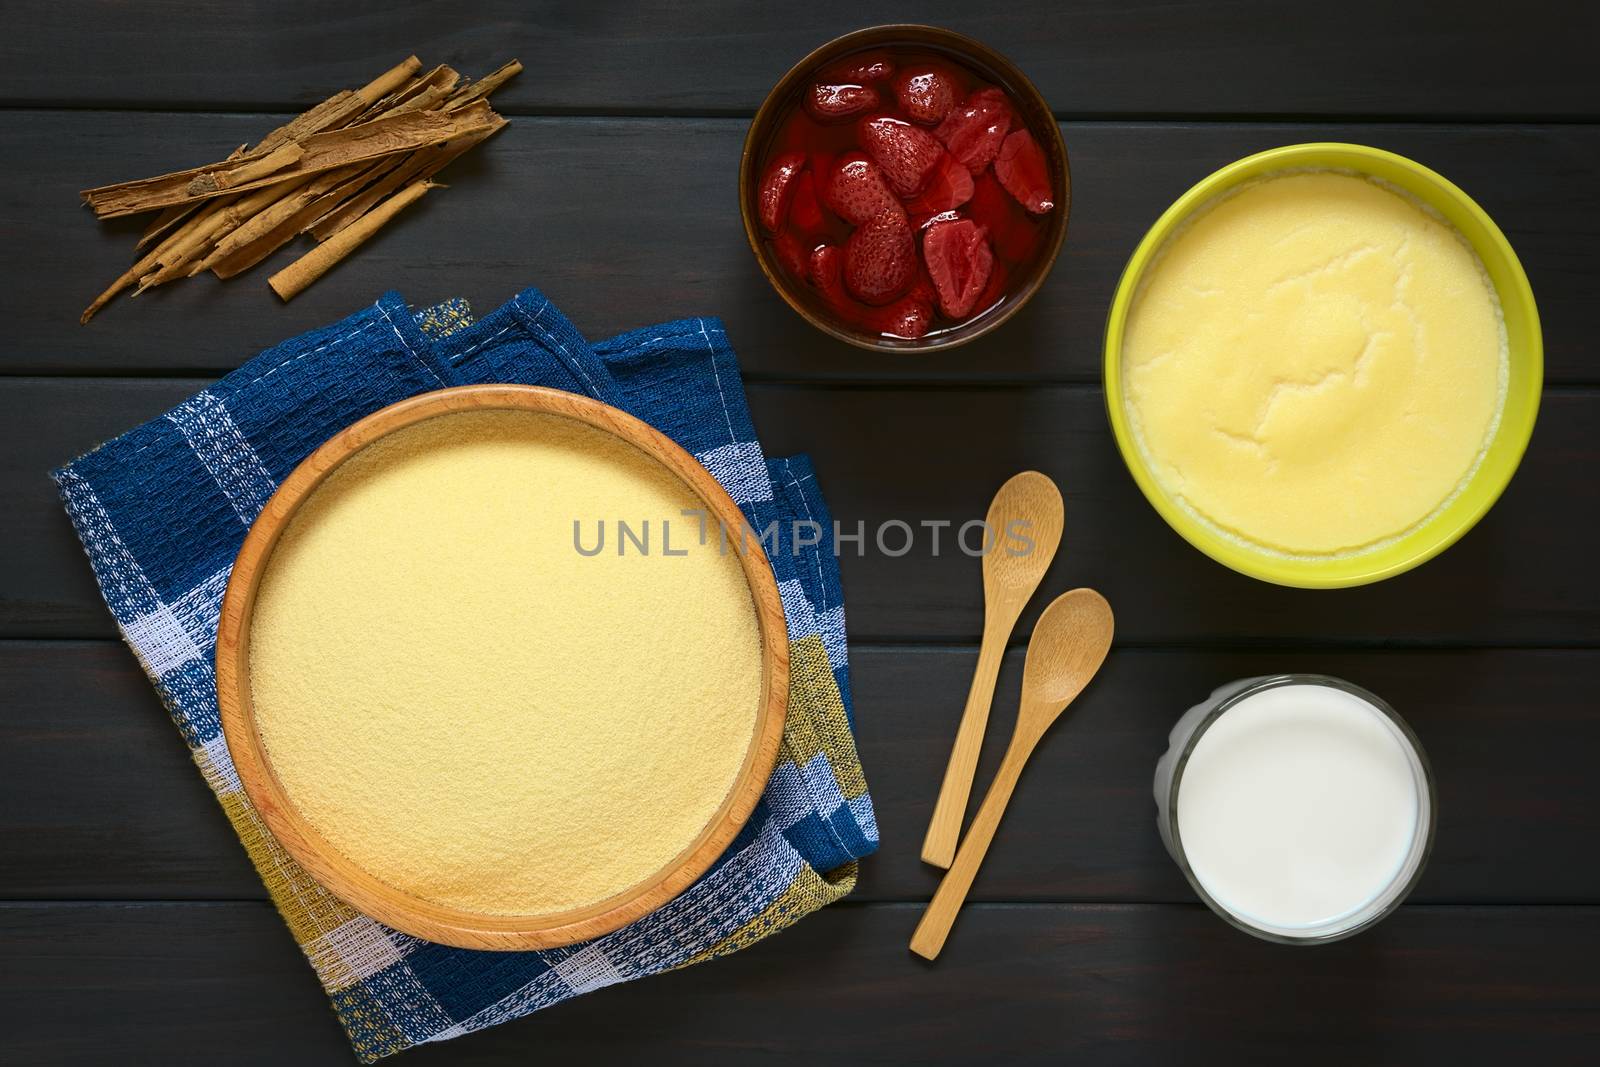 Overhead shot of raw semolina in wooden bowl, with semolina pudding, glass of milk, a bowl of strawberry compote and cinnamon sticks, photographed on dark wood with natural light  